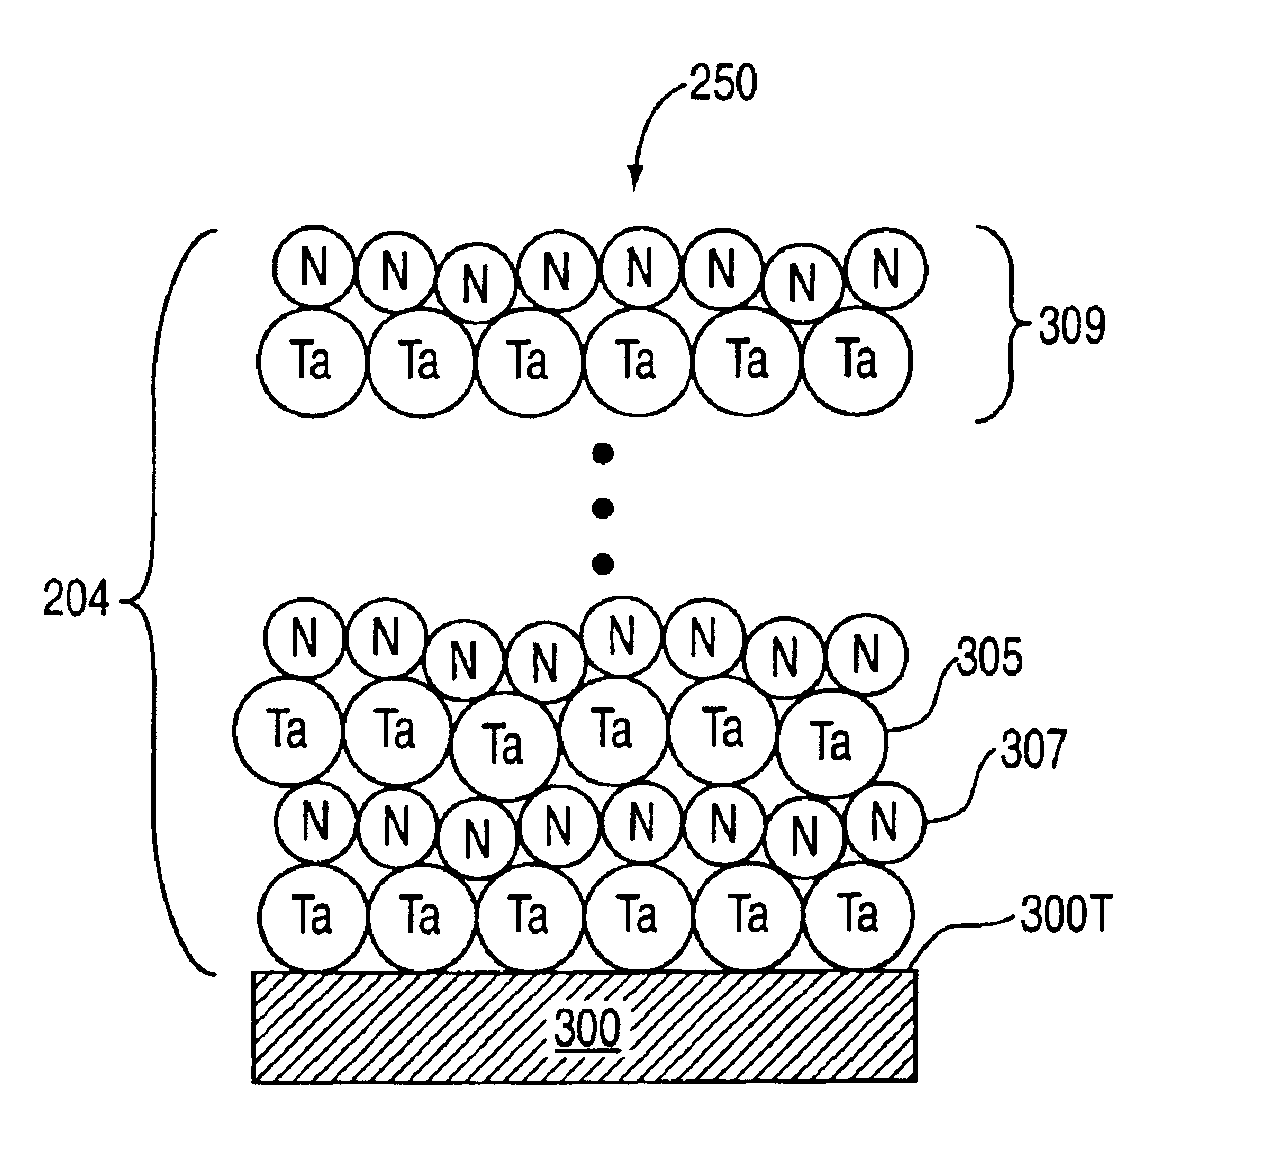 Formation of a tantalum-nitride layer